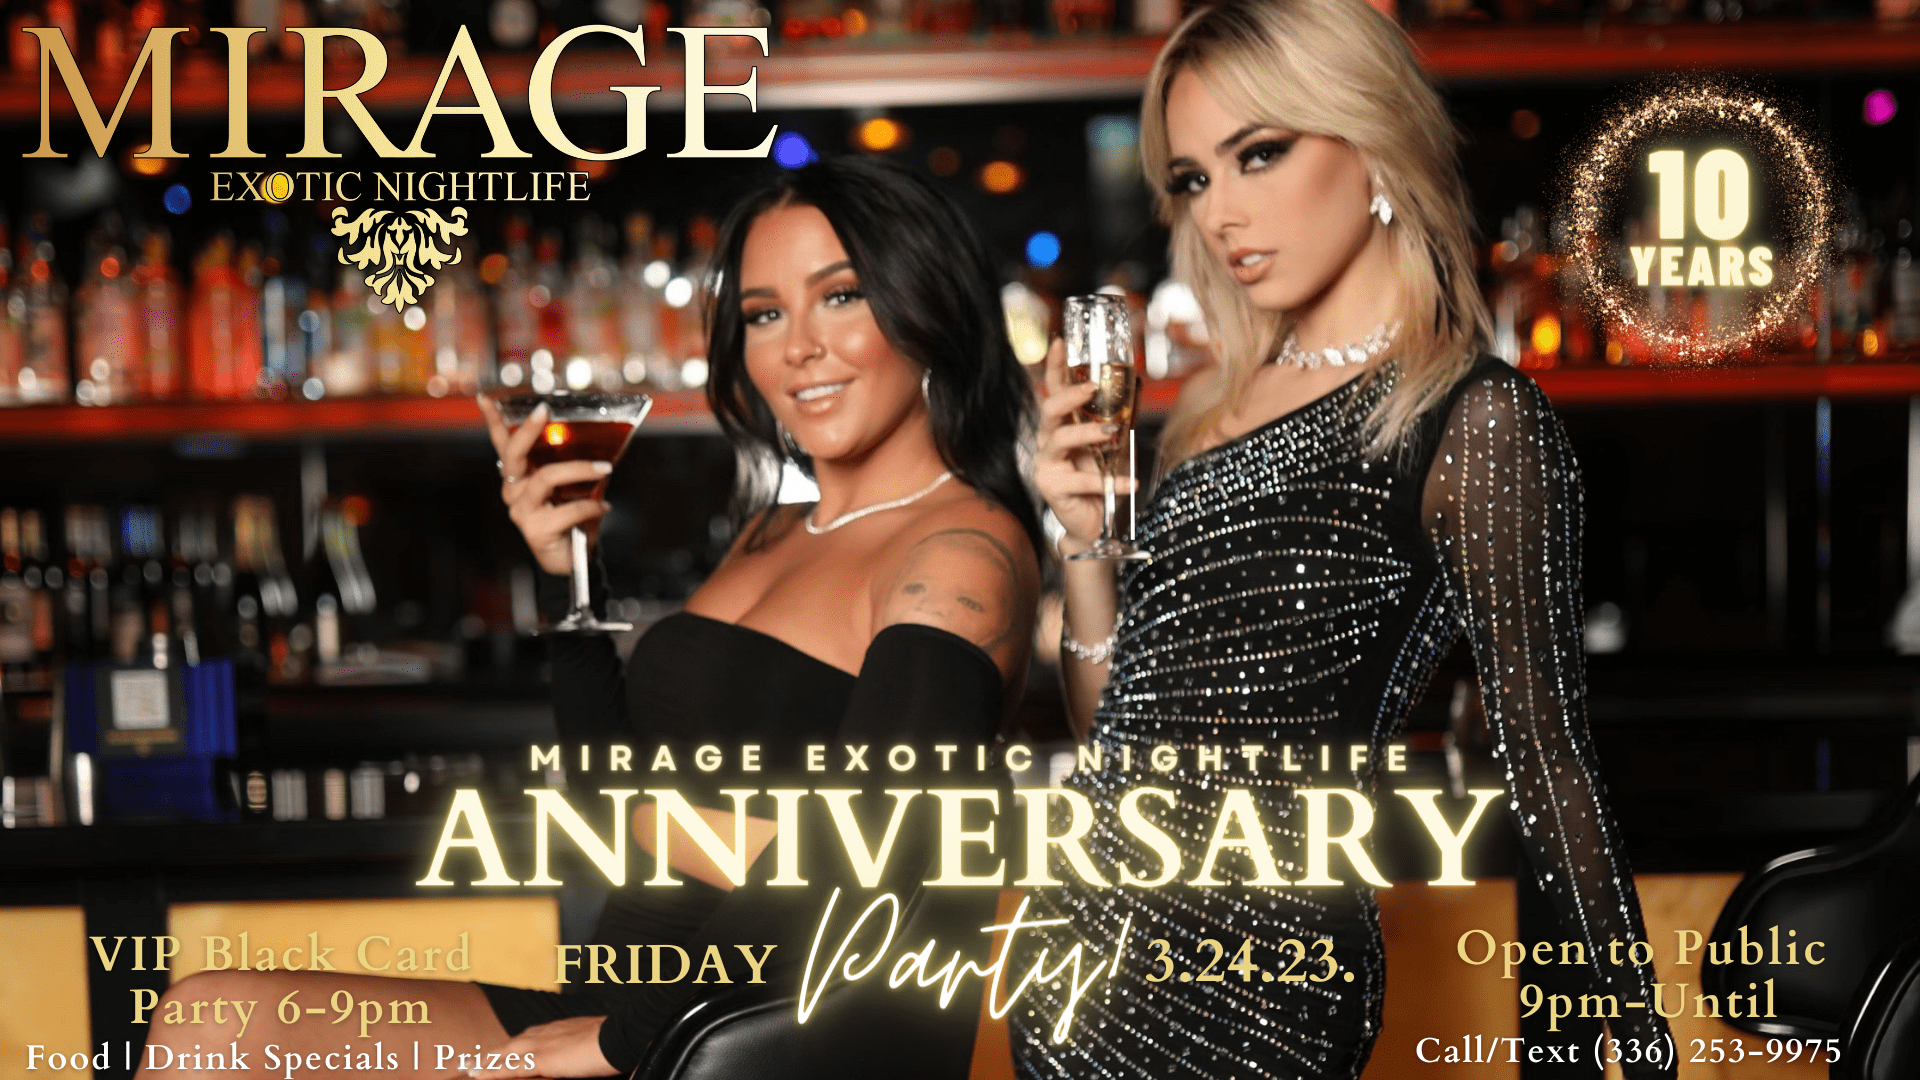 Mirage 10 Year Anniversary Party